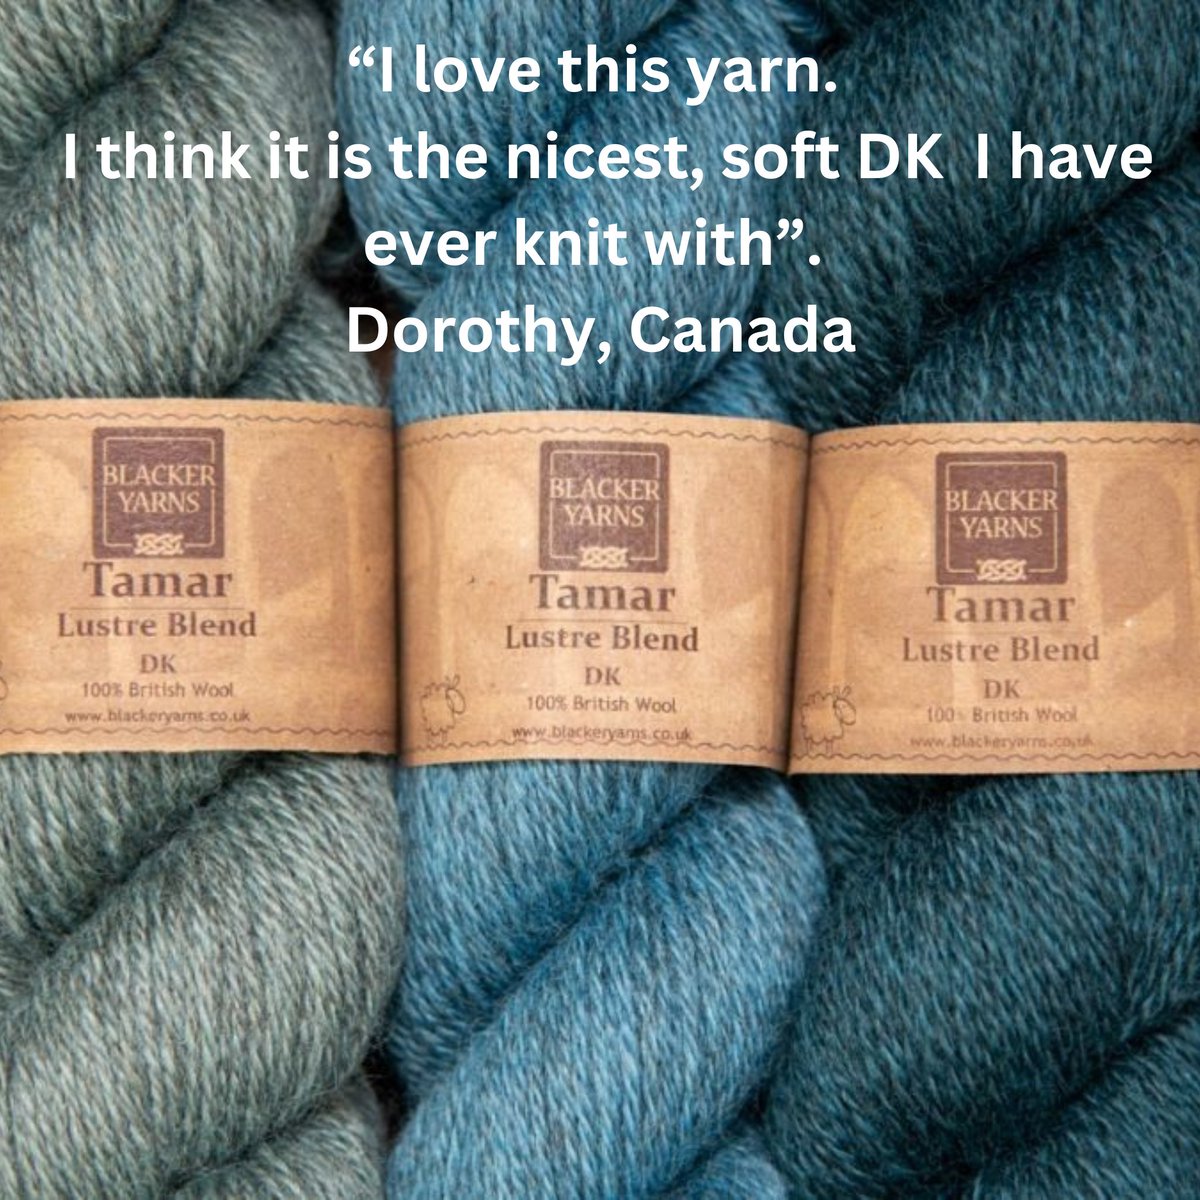 We have a range of DK weight knitting and crochet yarns including our Tamar collection. Take a look at our website to find out more: blackeryarns.co.uk/yarns-by-weigh…
#blackeryarns #doubleknitting #yarnshop #yarnloversofinstagram #yarns #britishmade